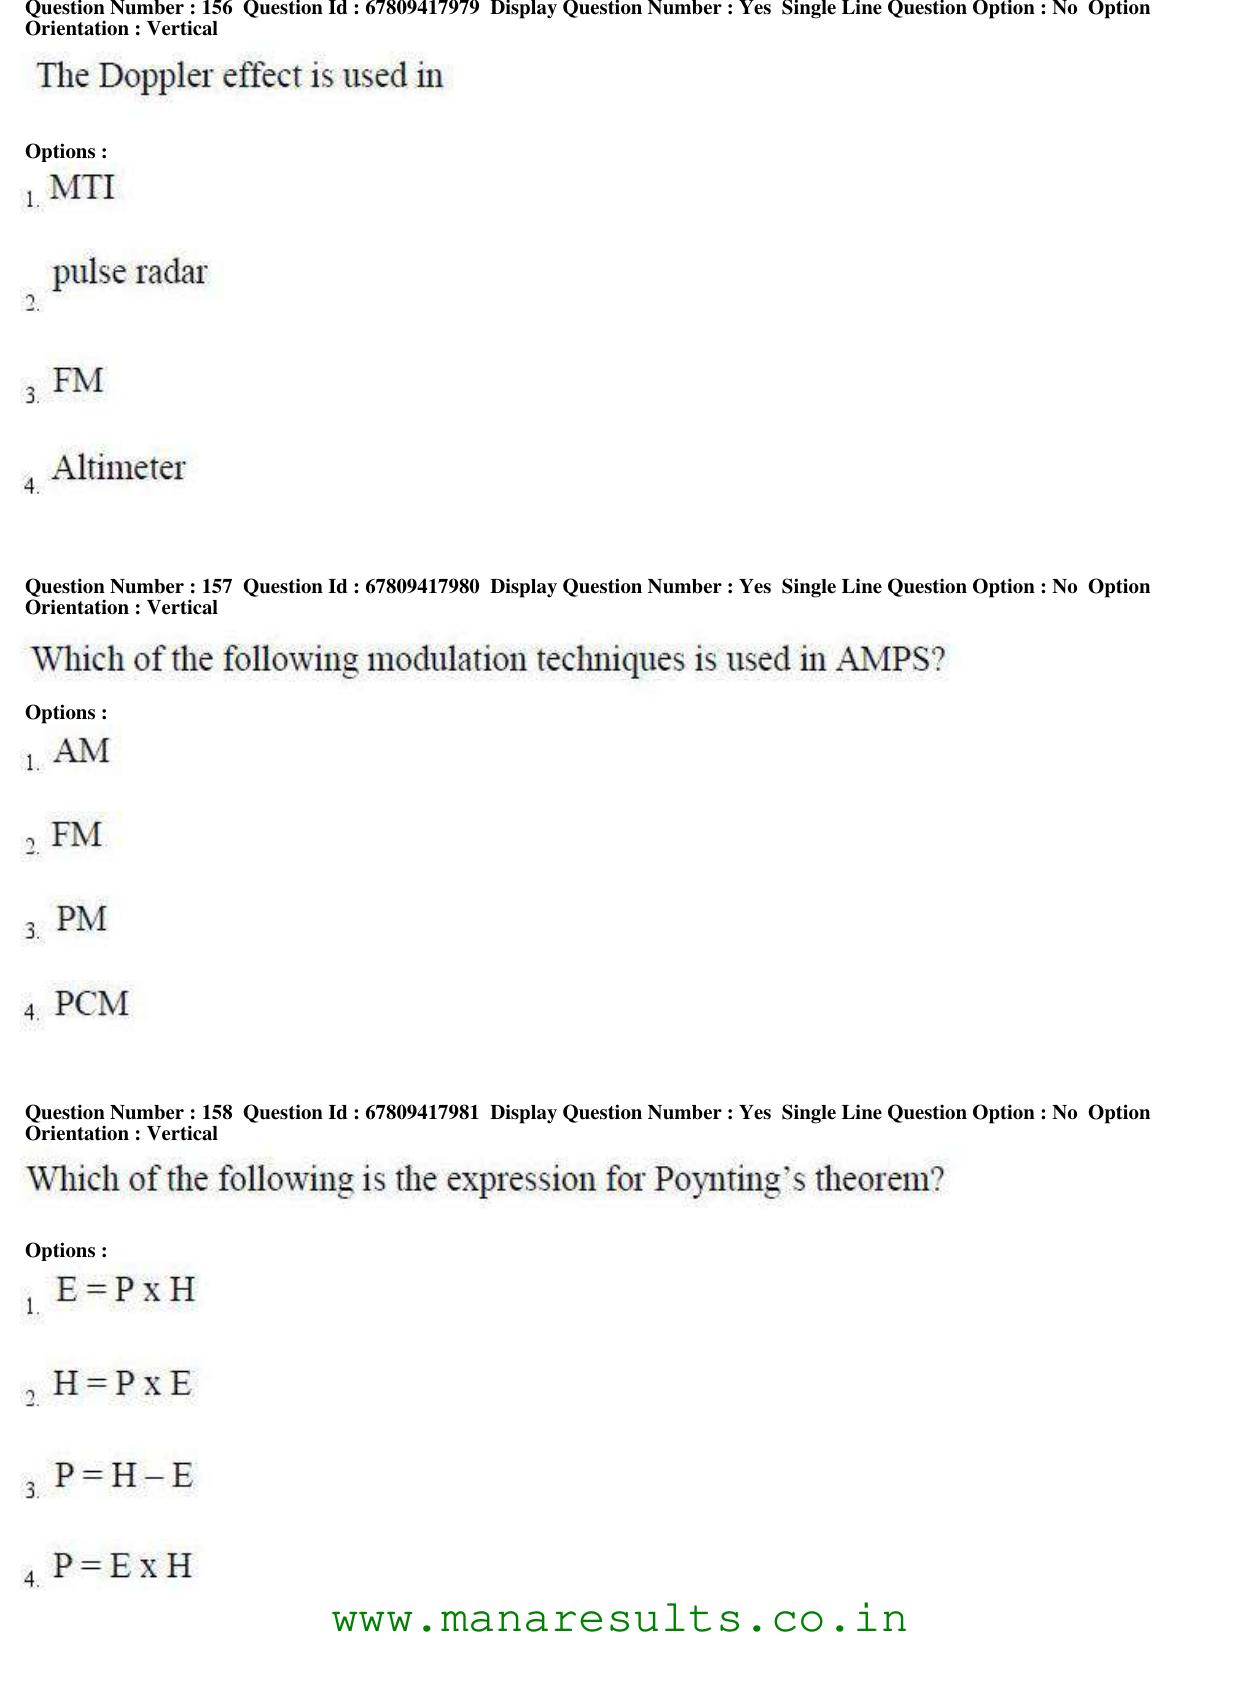 AP ECET 2018 - Electonics Communication Engineering Old Previous Question Papers - Page 57